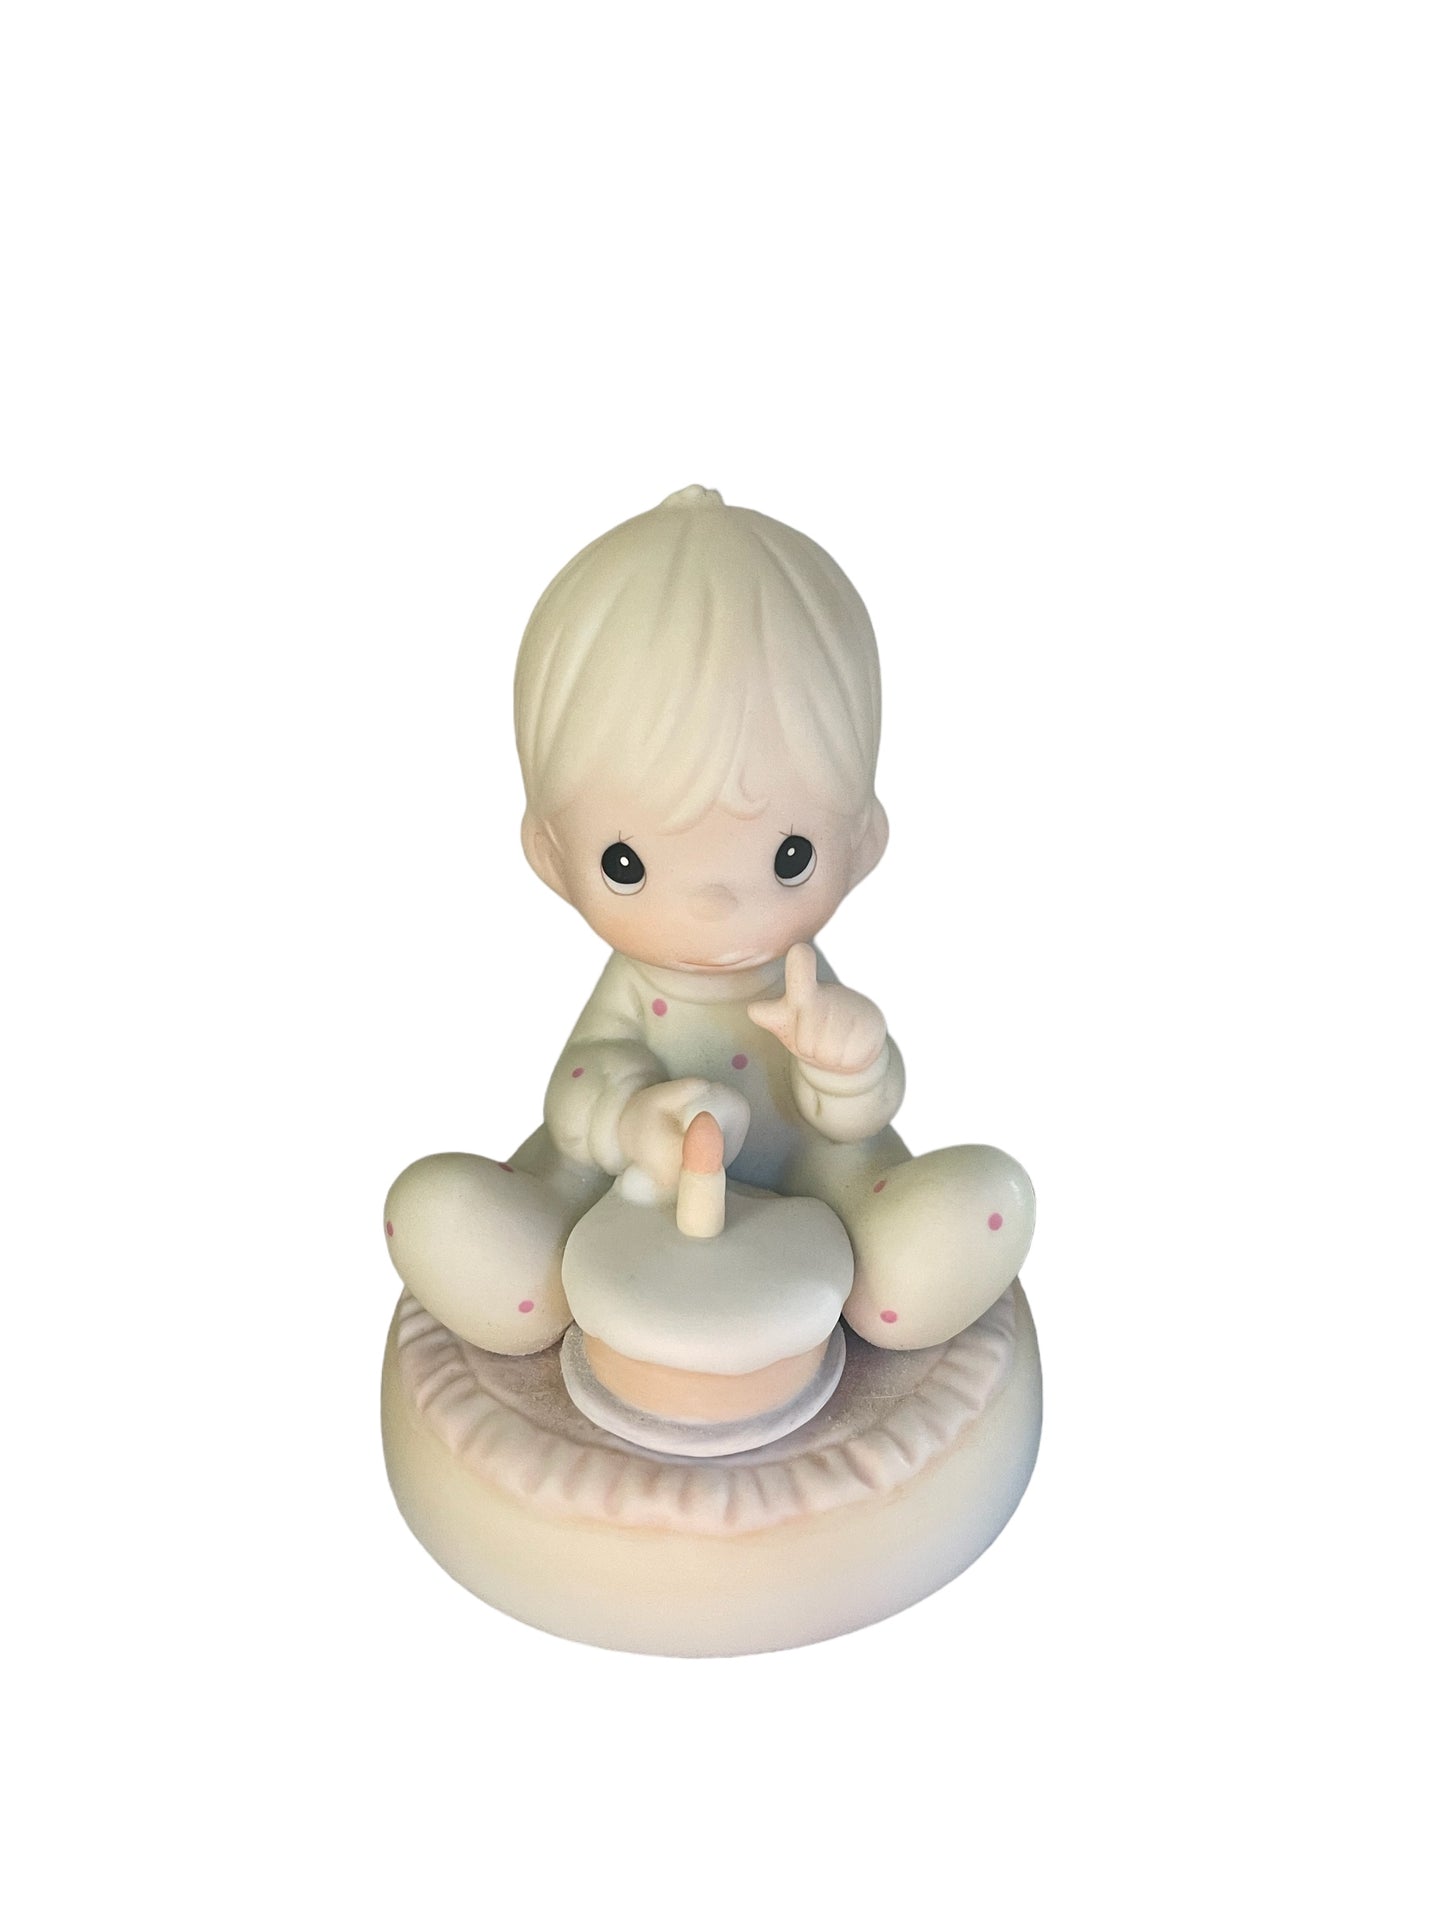 Baby's First Birthday - Precious Moments Figurine 524069